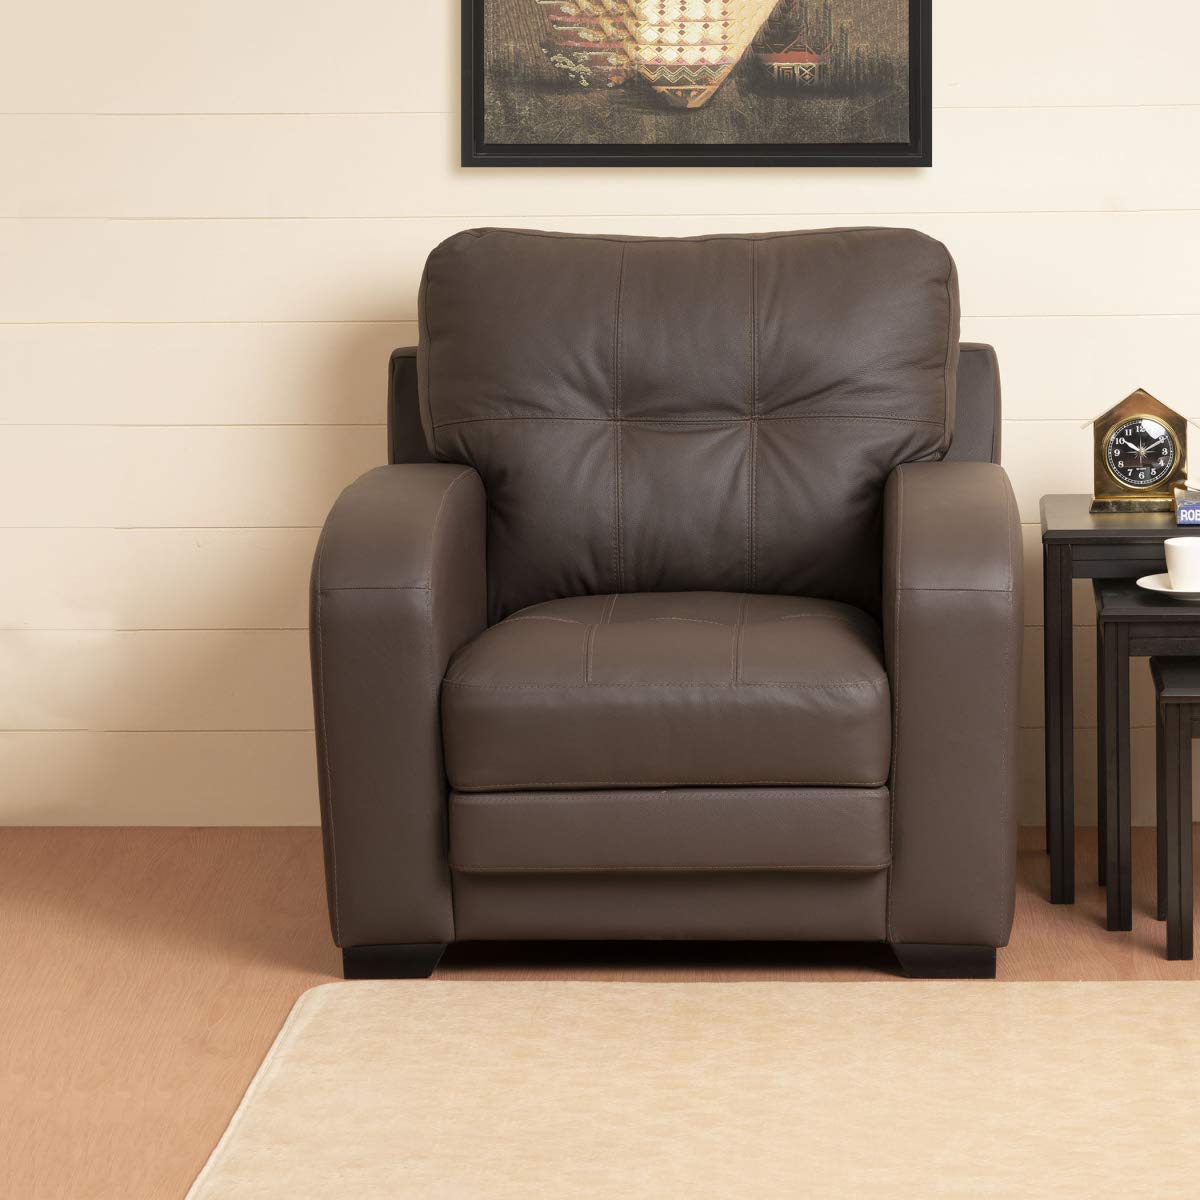 Durian Janet Single Seater Lounge Chair (Glossy Finish, Brown)